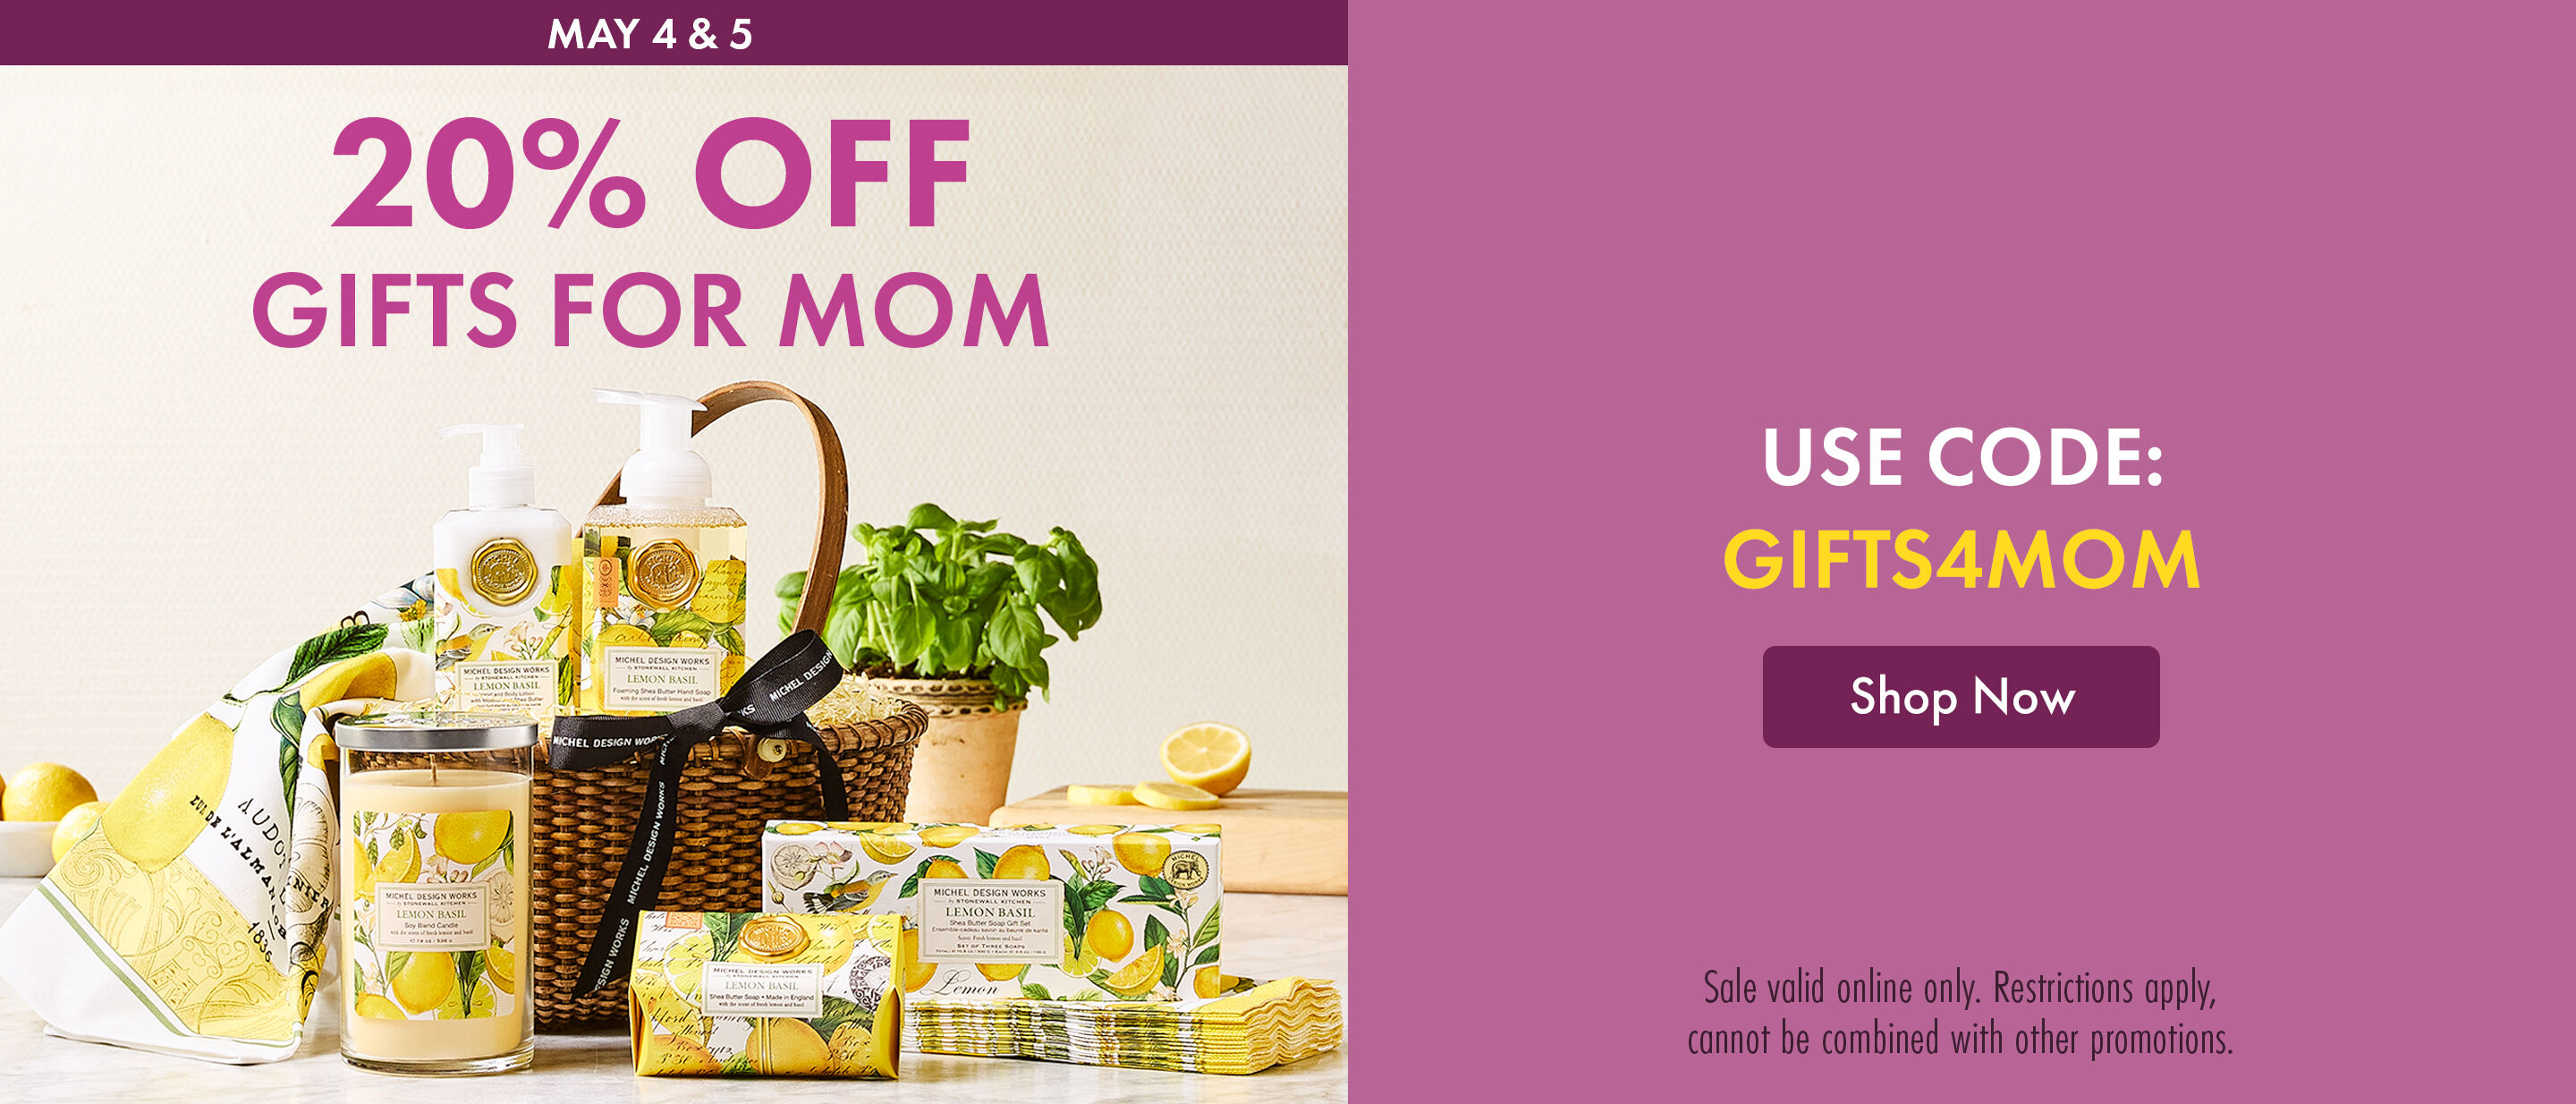 May 4 & 5 – 20% OFF Gifts for Mom - USE CODE: GIFTS4MOM - SHOP NOW